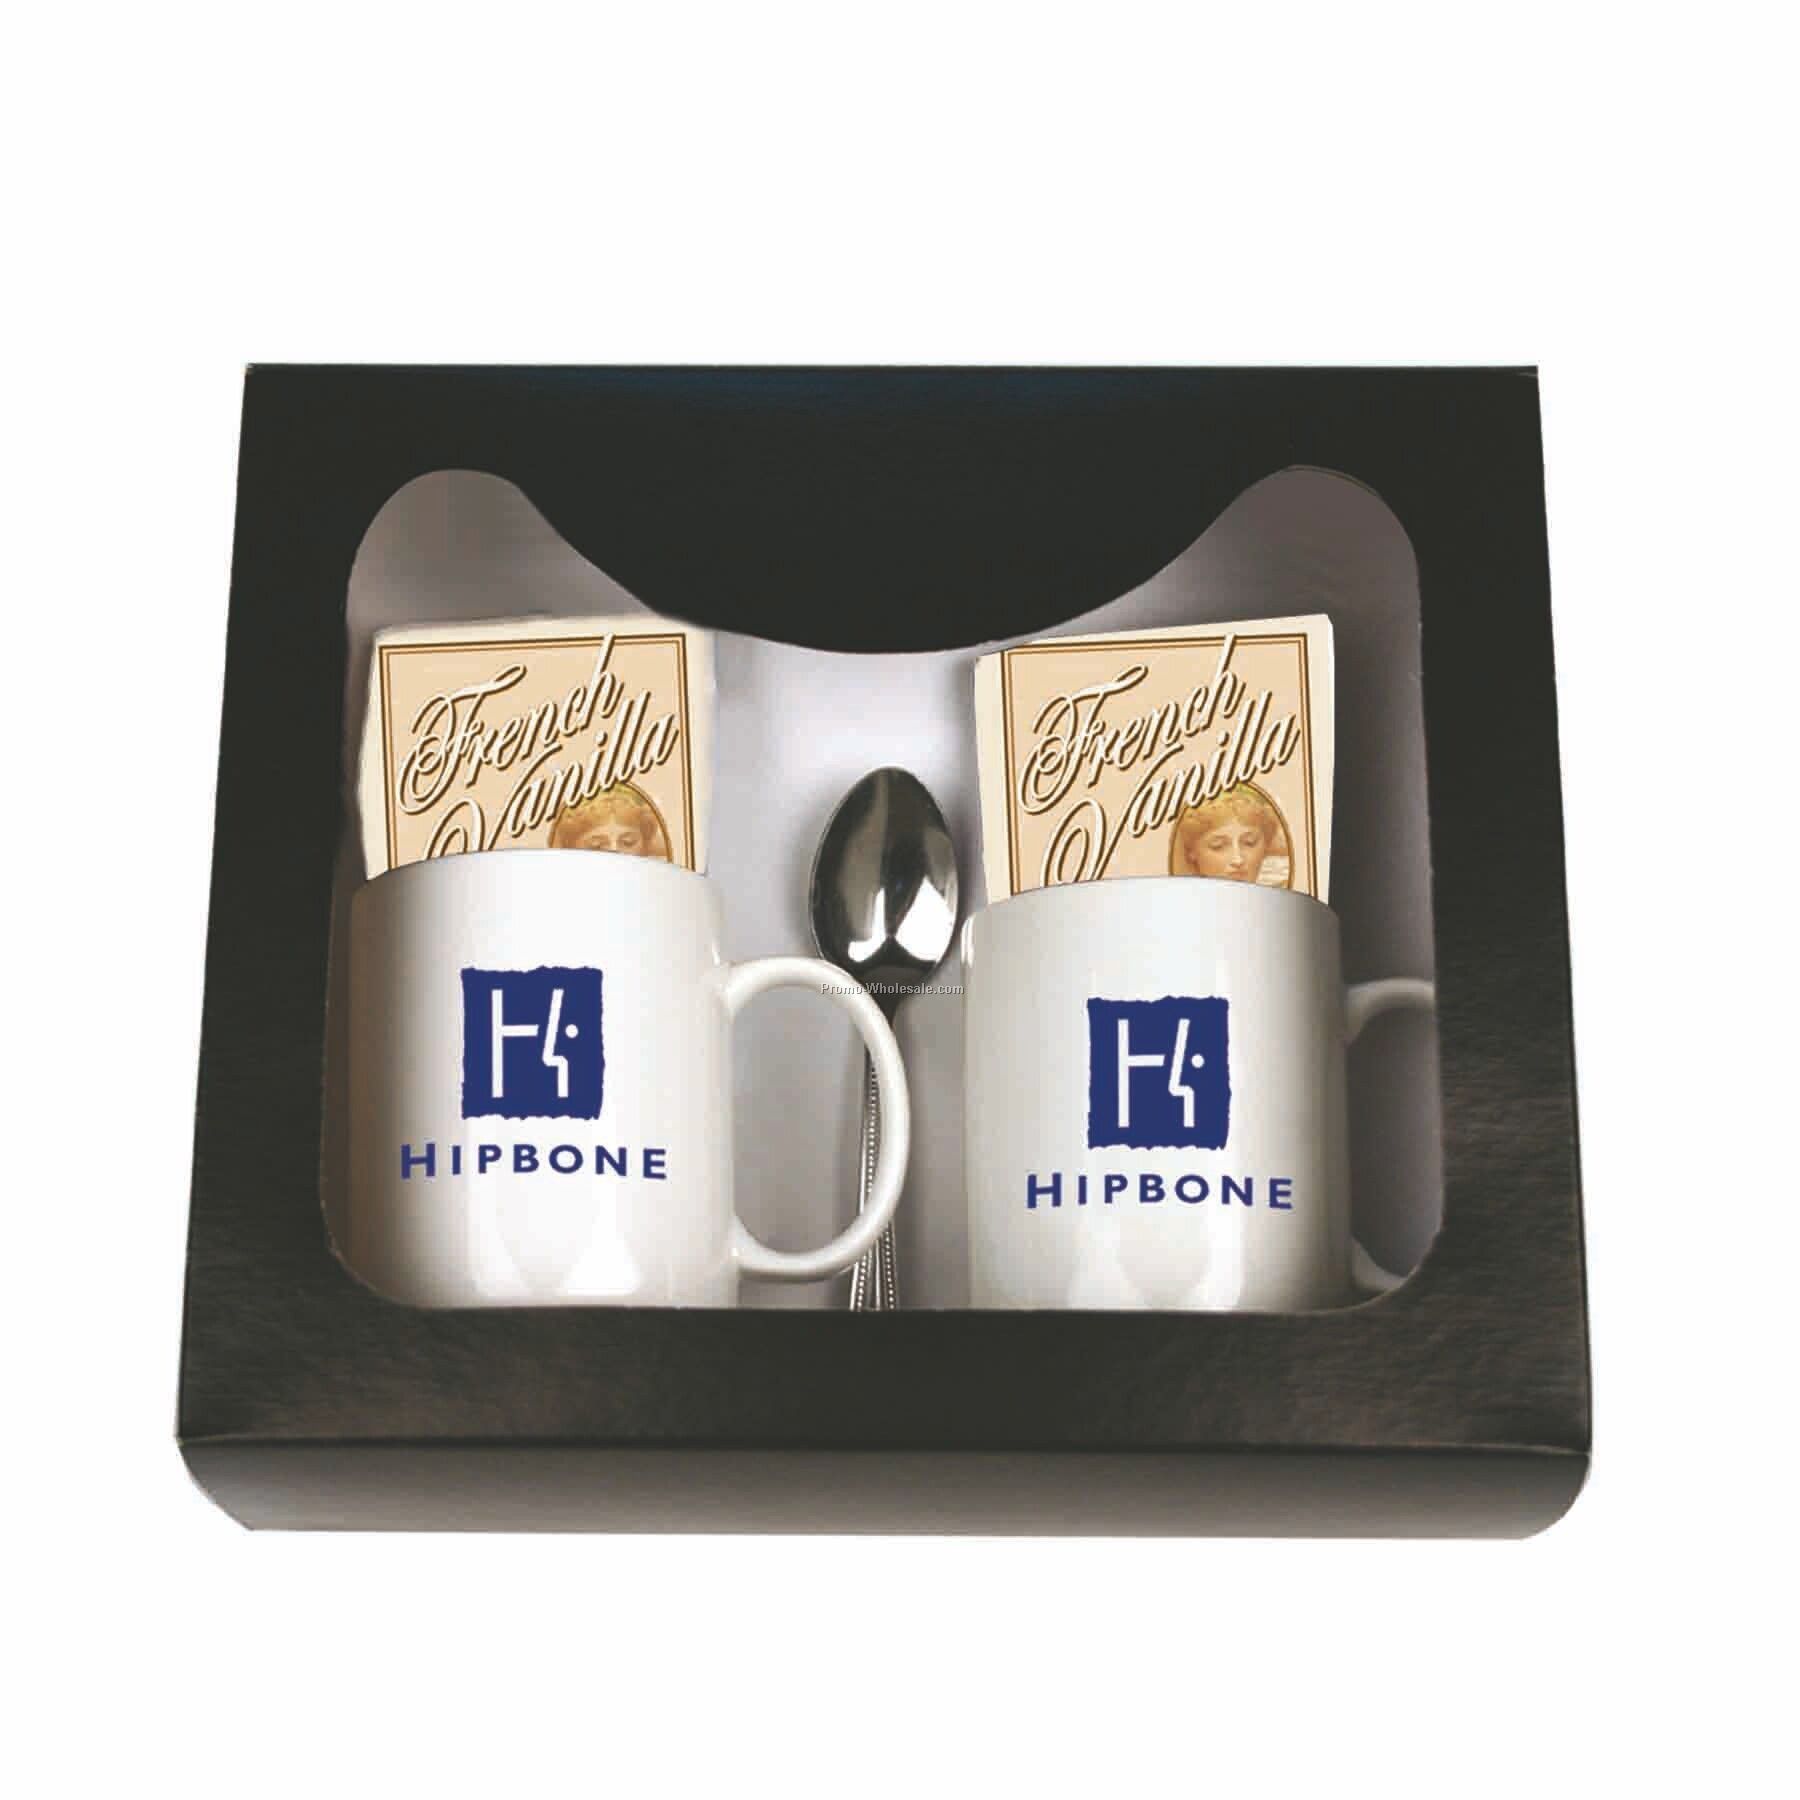 Hot Chocolate For 2 Gourmet Gift Set (French Vanilla)